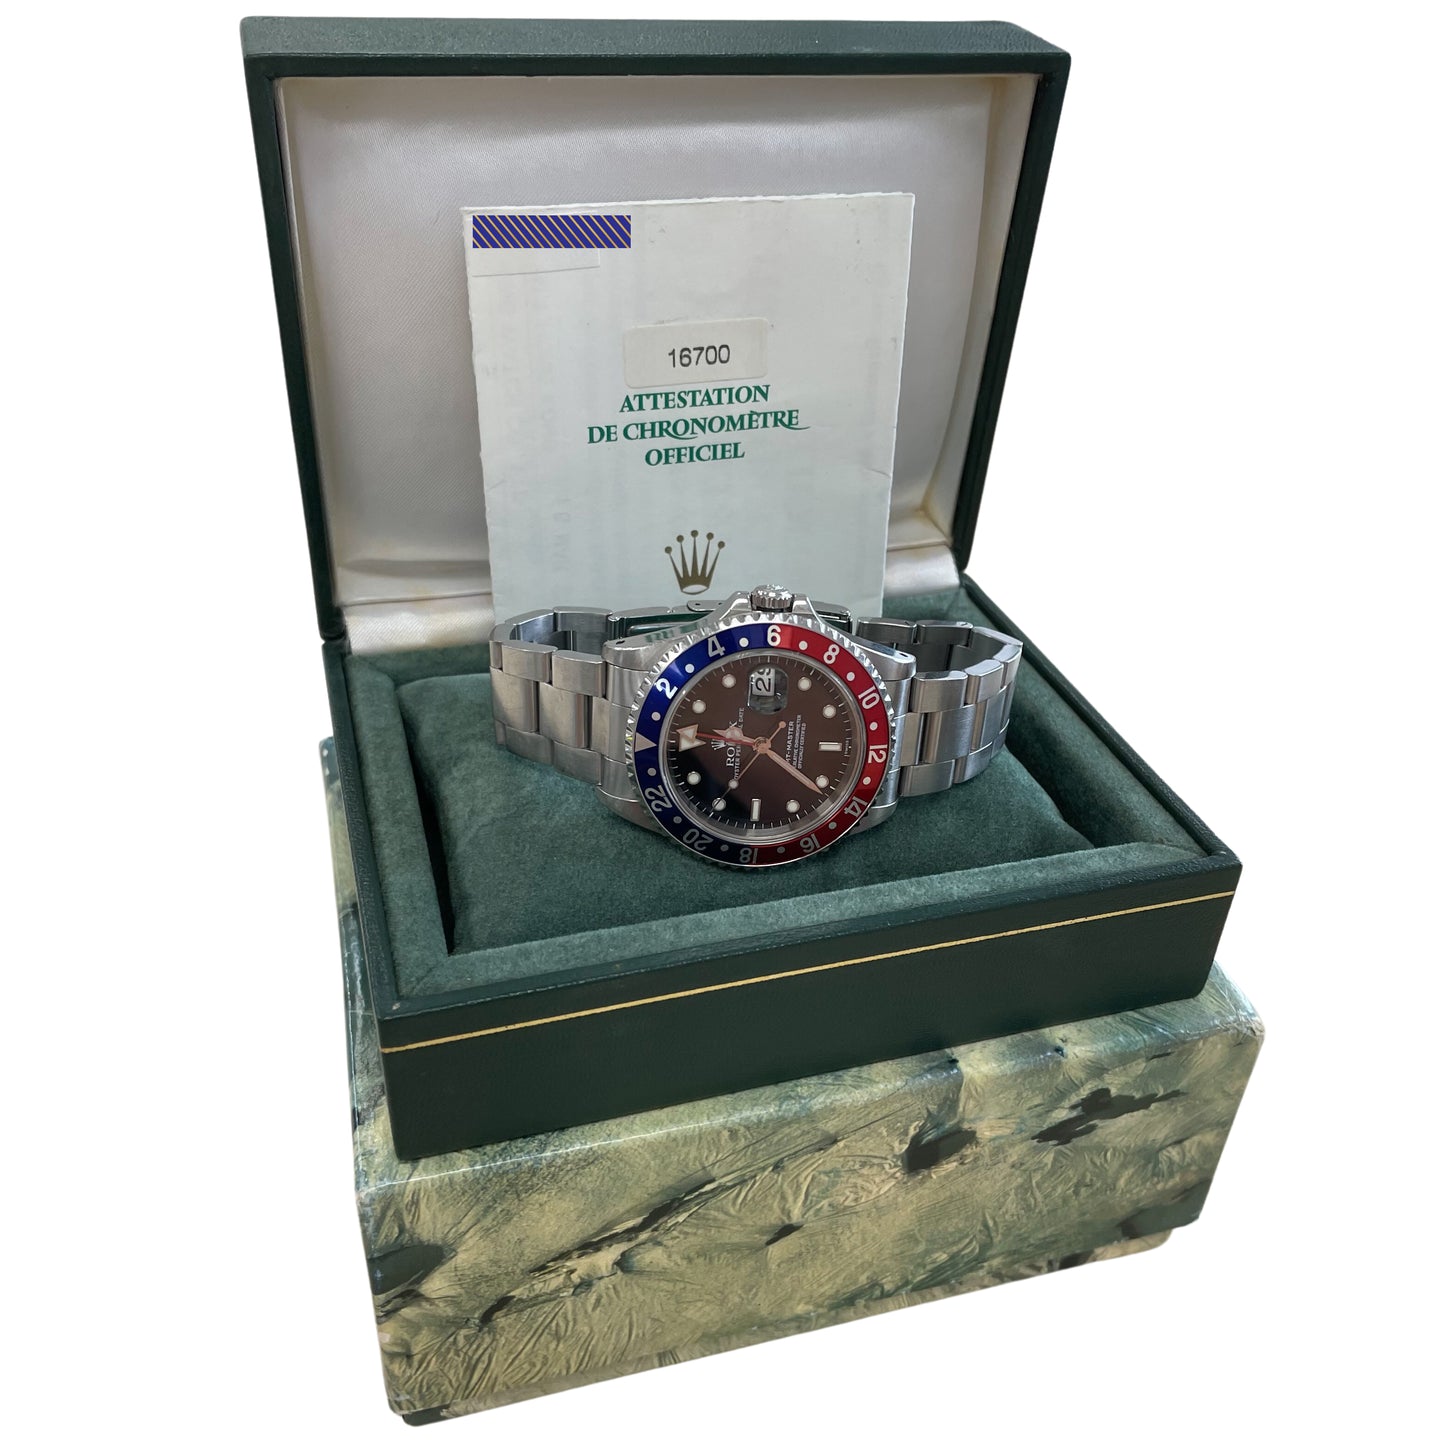 1999 PAPERS Rolex GMT-Master 40mm PEPSI Blue Red Stainless Steel Watch 16700 B+P